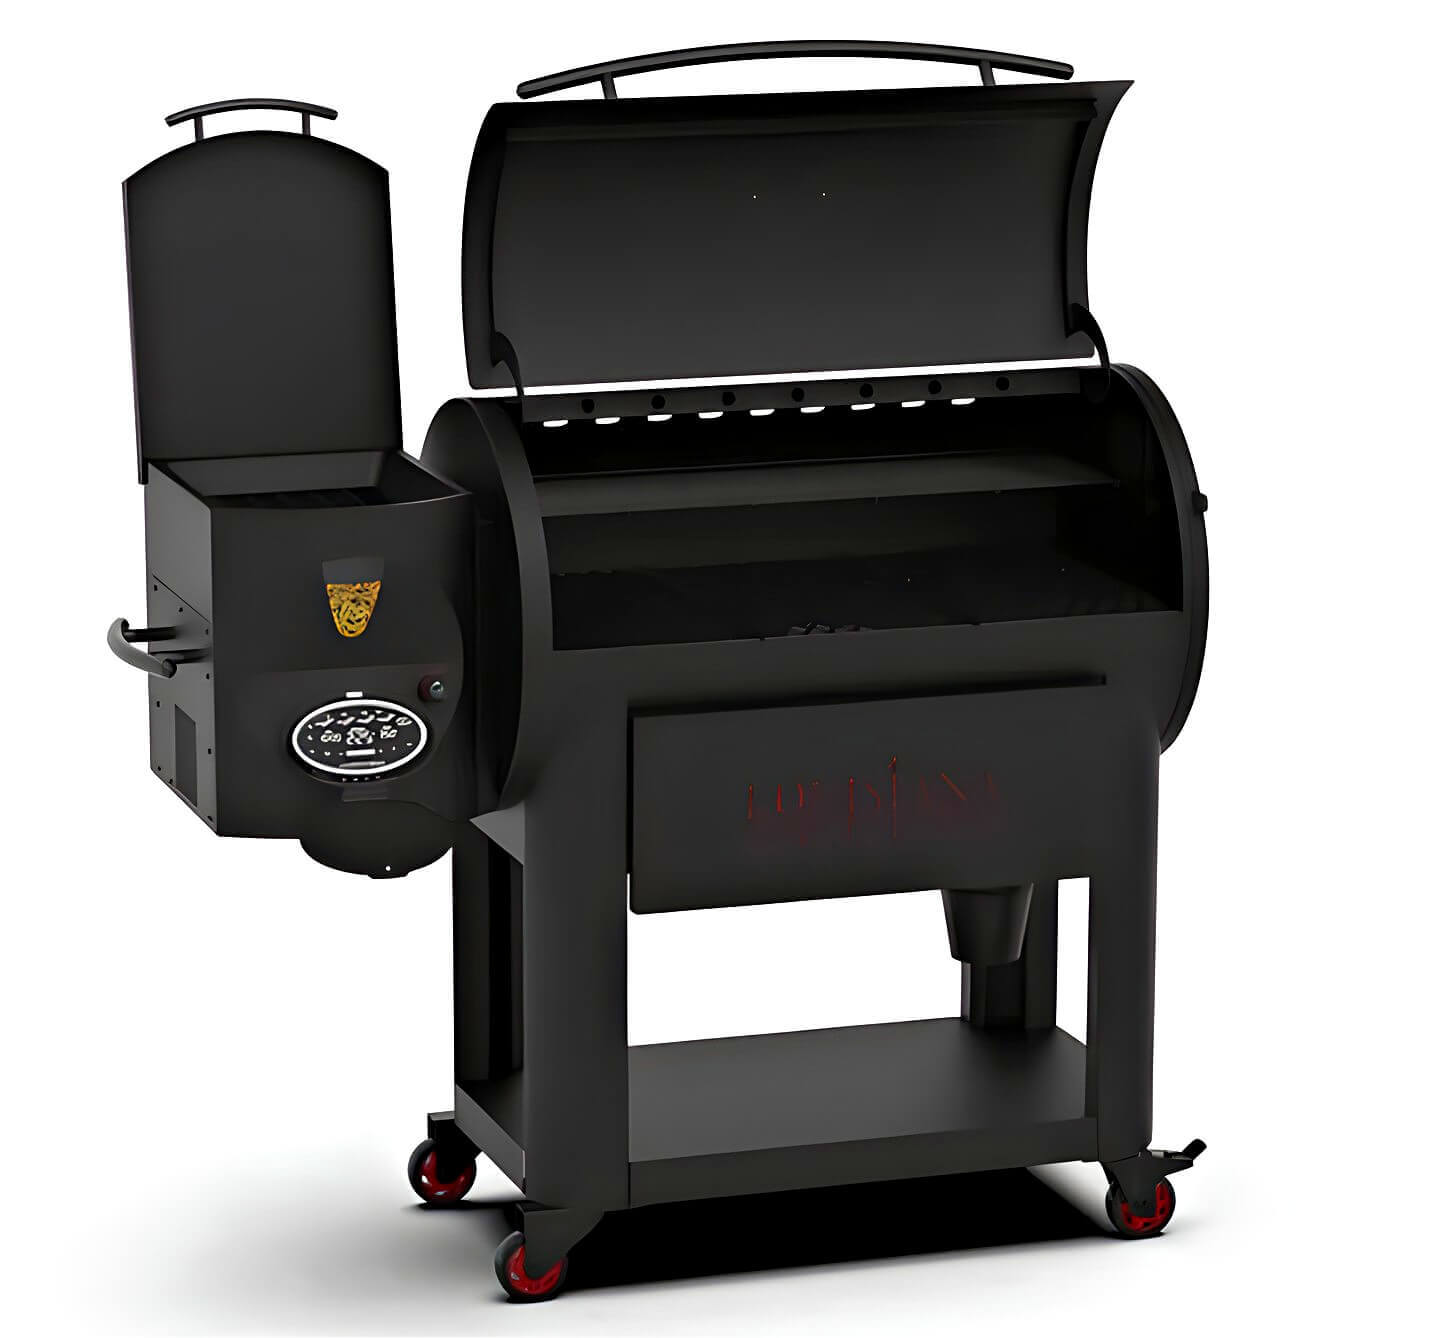 Louisiana Grills Founders Series Premier 1200 Pellet Grill with Large Grilling Space